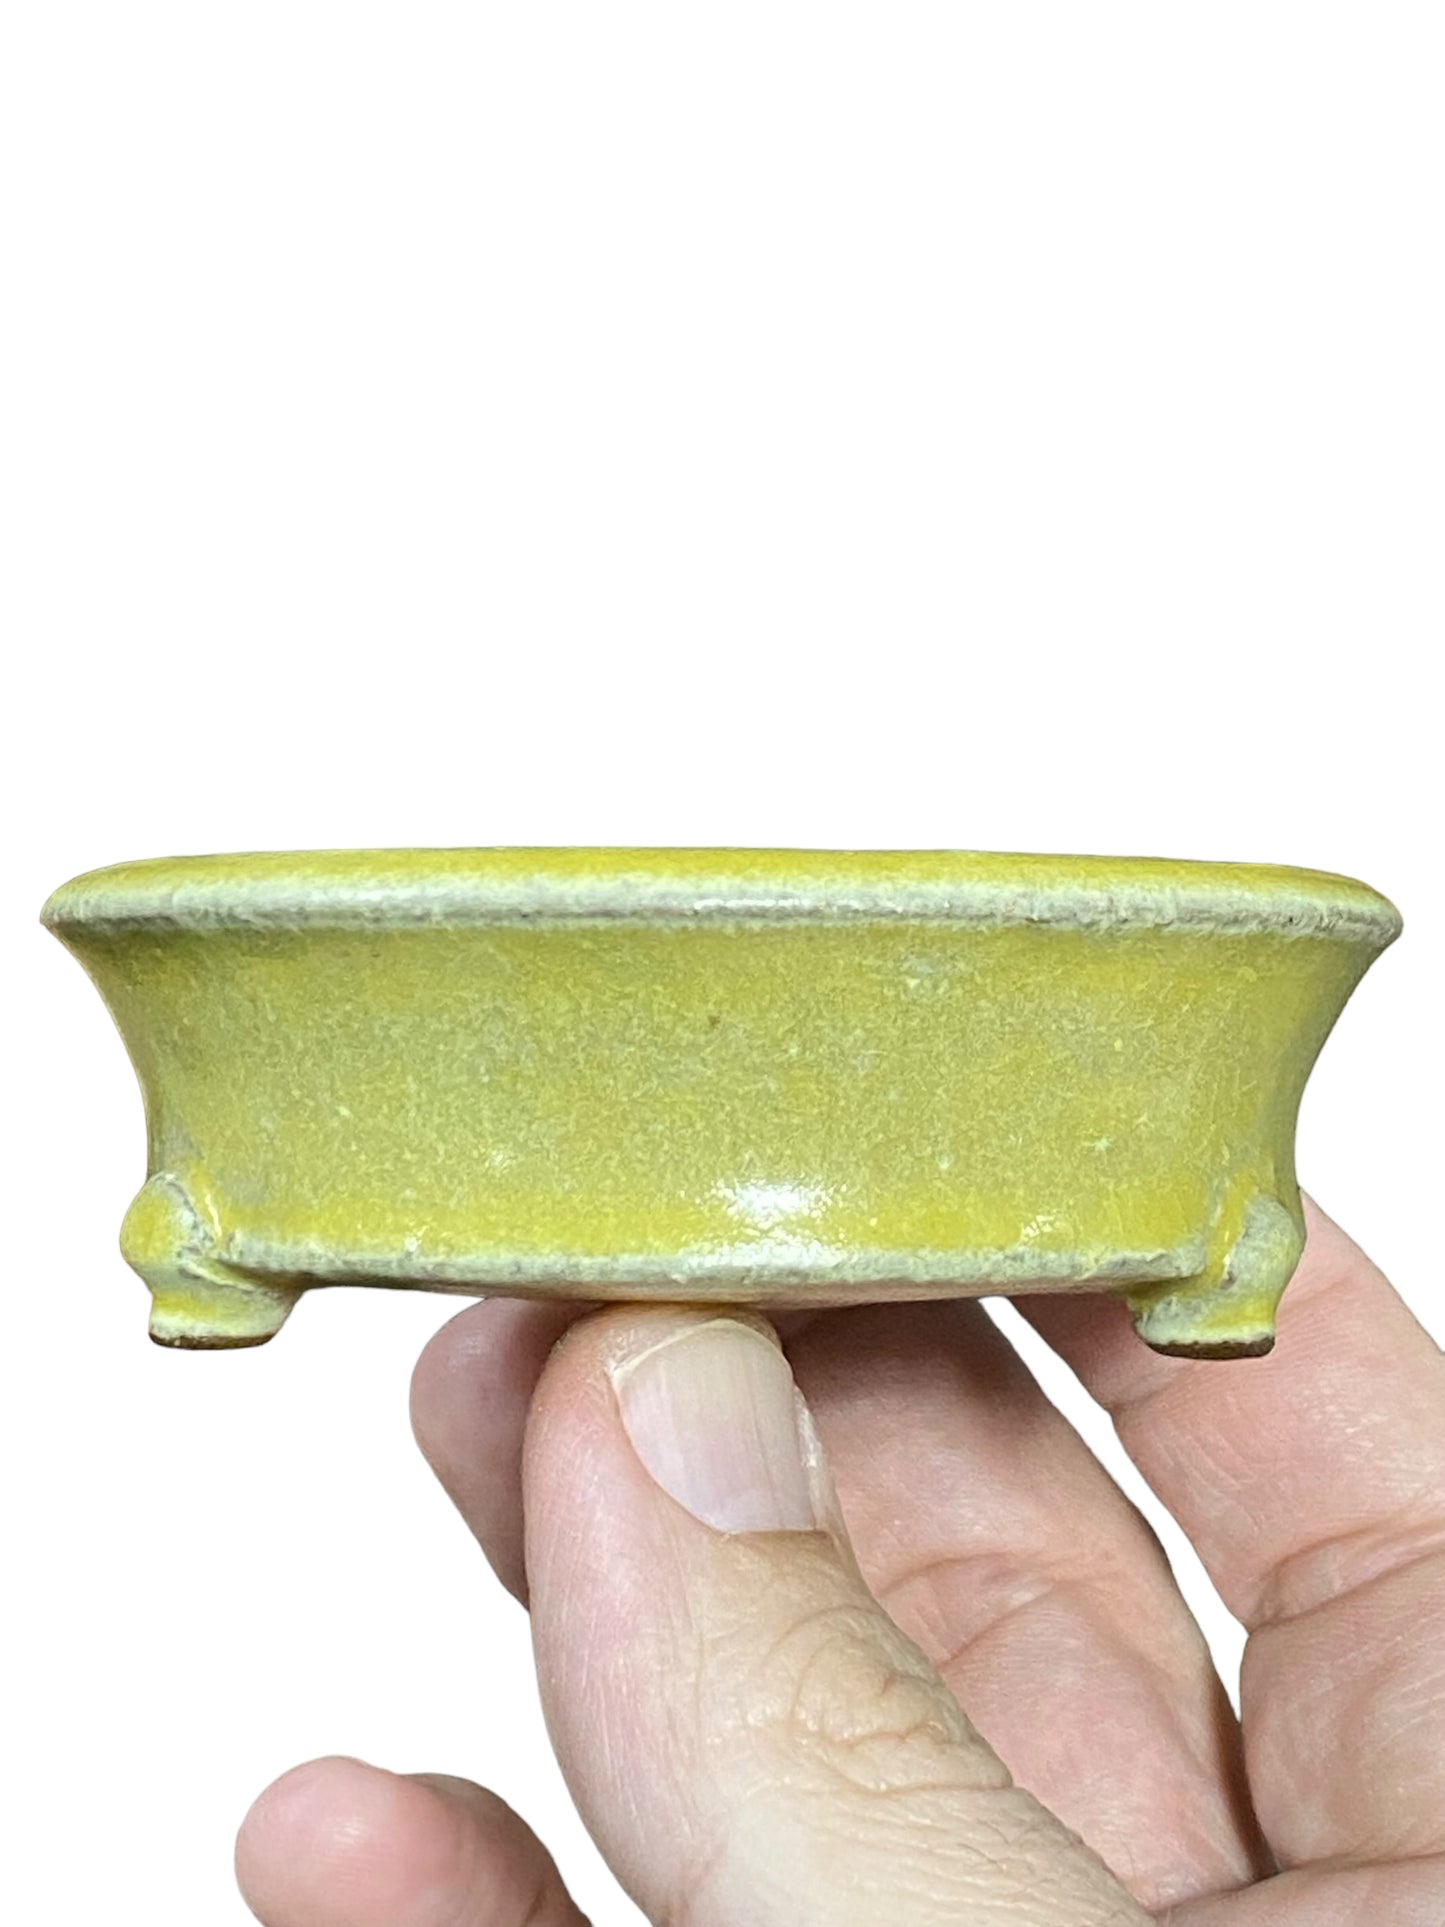 Eimei - Older Yellow Crackle Glazed Footed Round Bonsai Pot